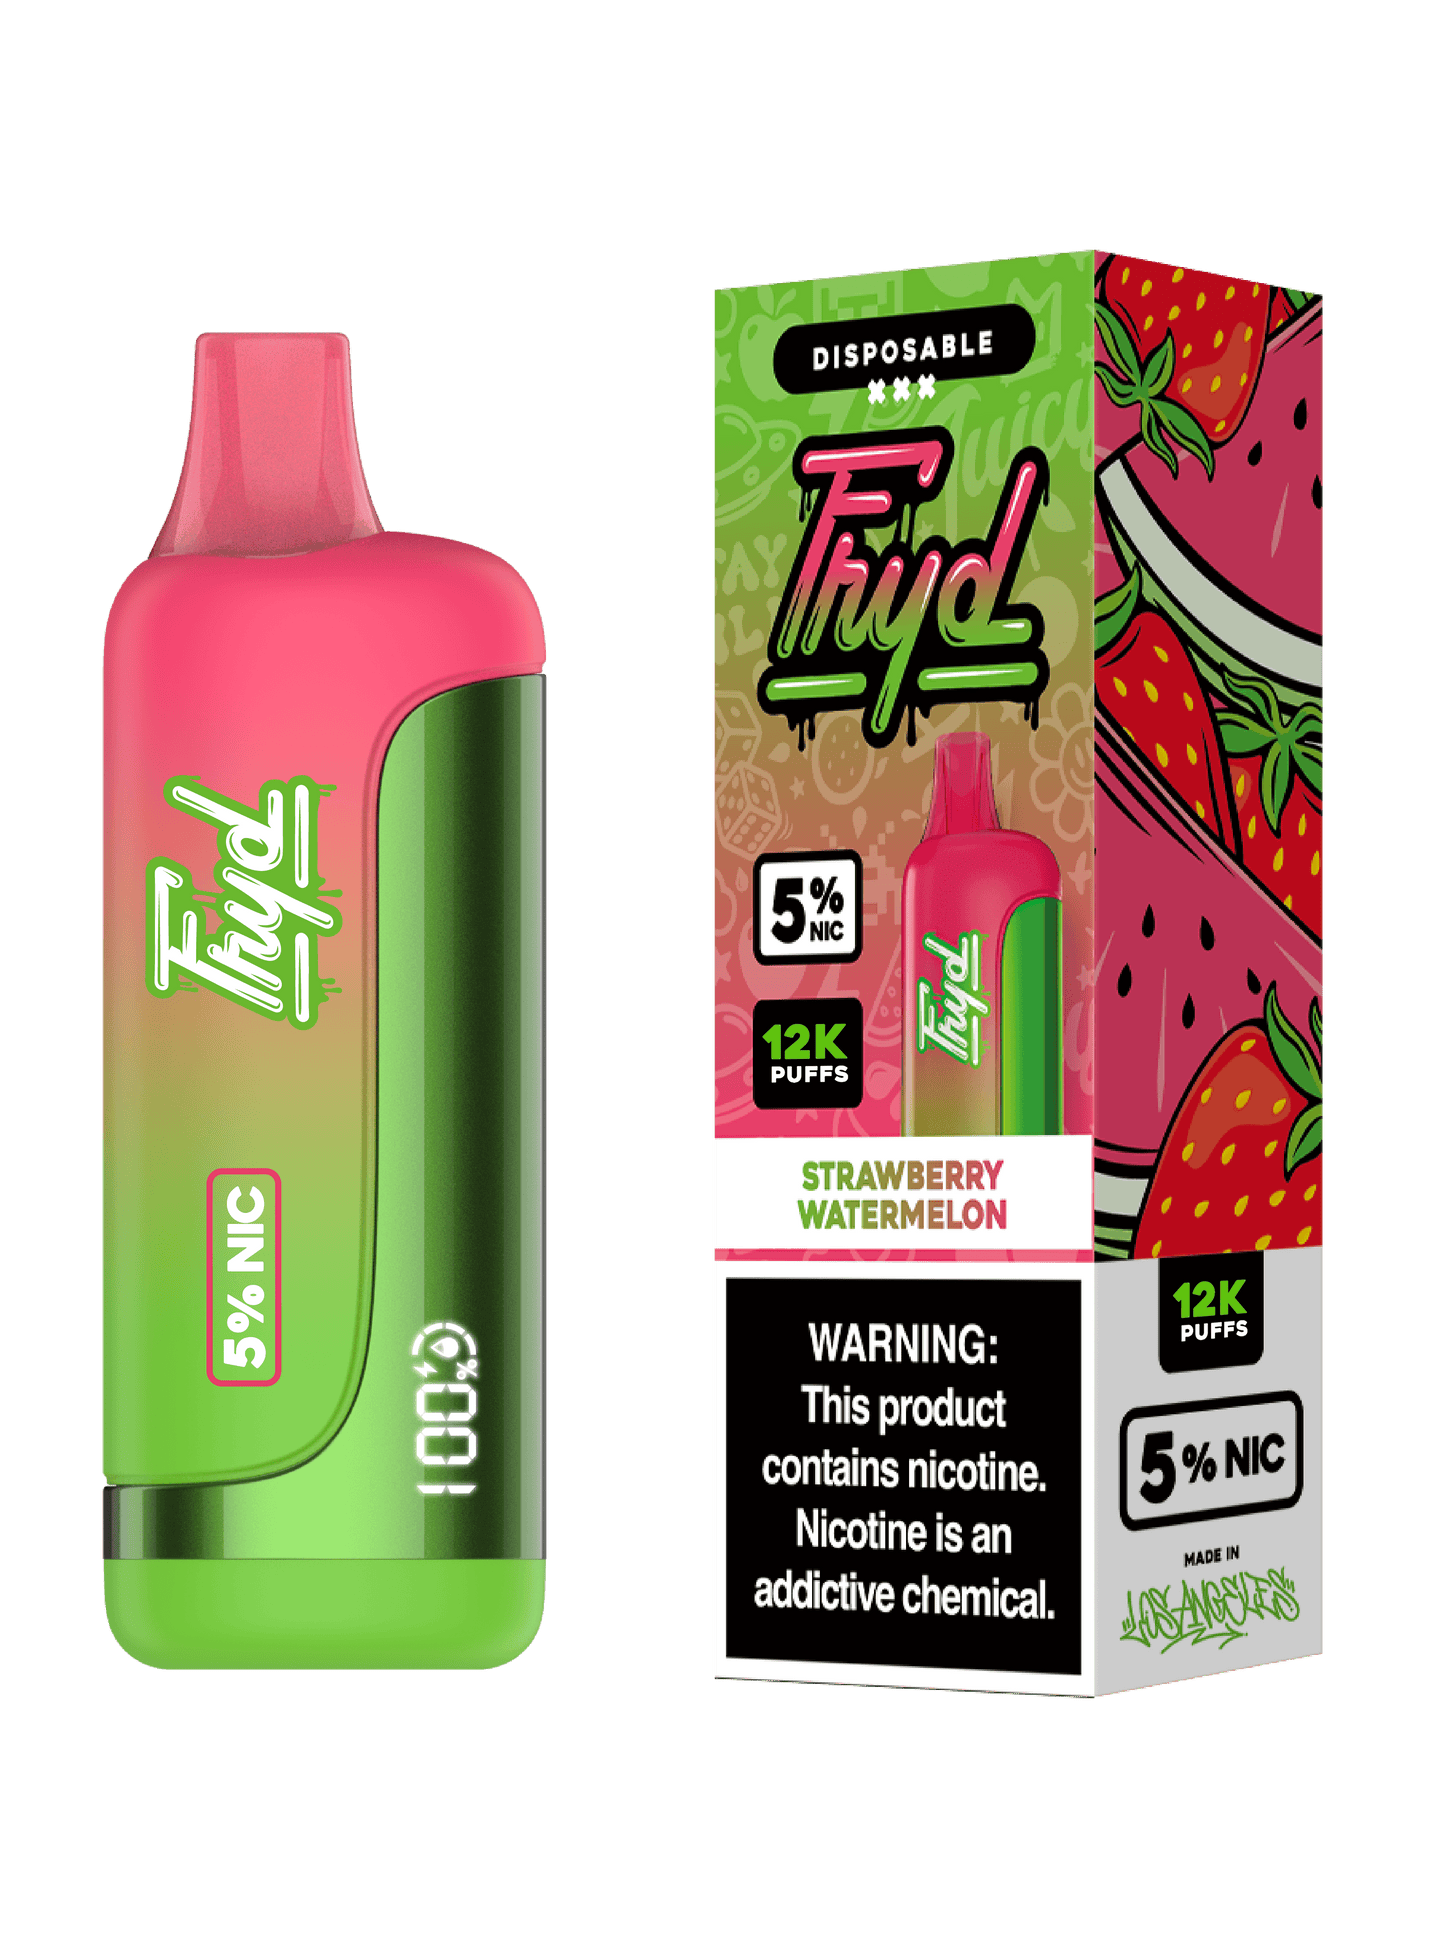 FRYD Disposable 12,0000 Puffs (17mL) 50mg Strawberry Watermelon with packaging